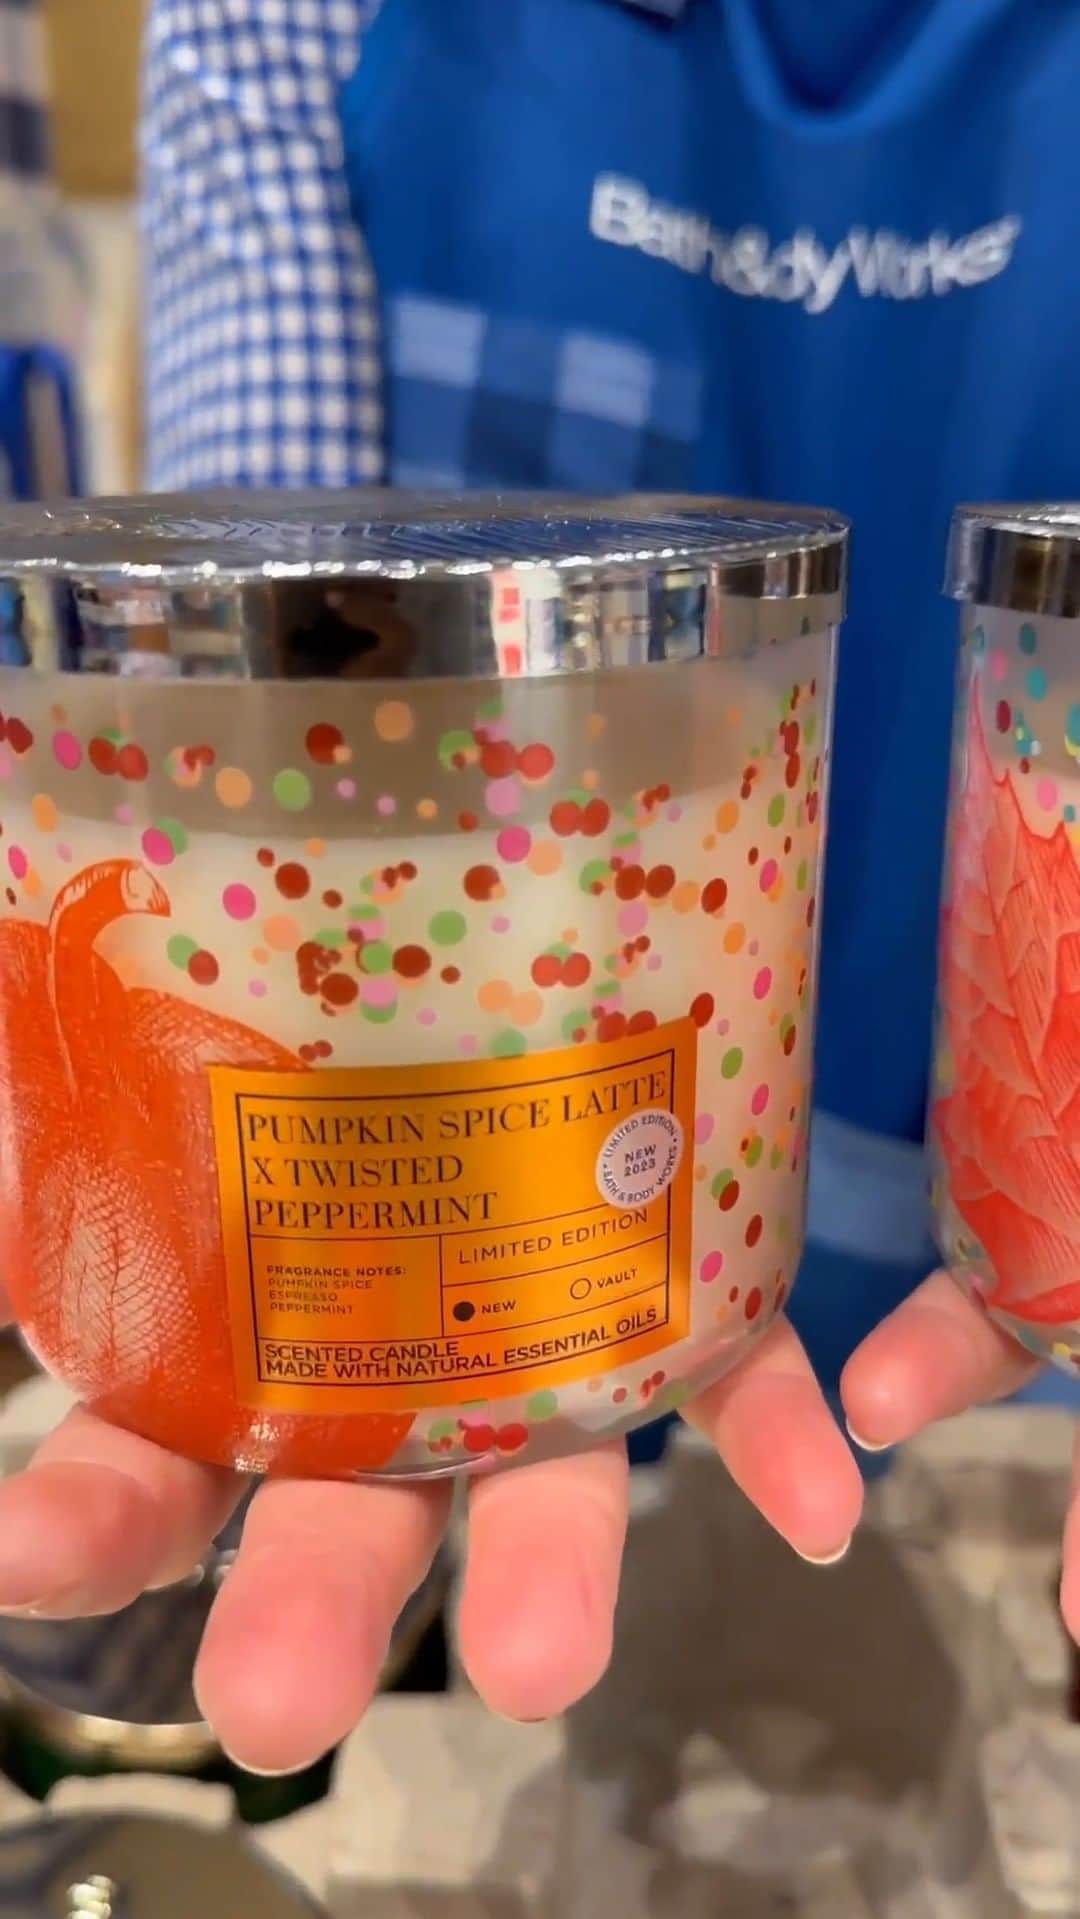 Bath & Body Worksのインスタグラム：「❗ NEW CANDLE DROP ALERT 🍂 ​  FALL for our NEW limited-edition fragrances while you can​: 🍁 Radiant Red Maple​ 🎃 Pumpkin Spice Latte x Twisted Peppermint!​ (Bonus: ALL 3-Wick Candles are $12.95 🙀)​  @ your shopping bestie in the comments👇 so they don't miss out!🛍」